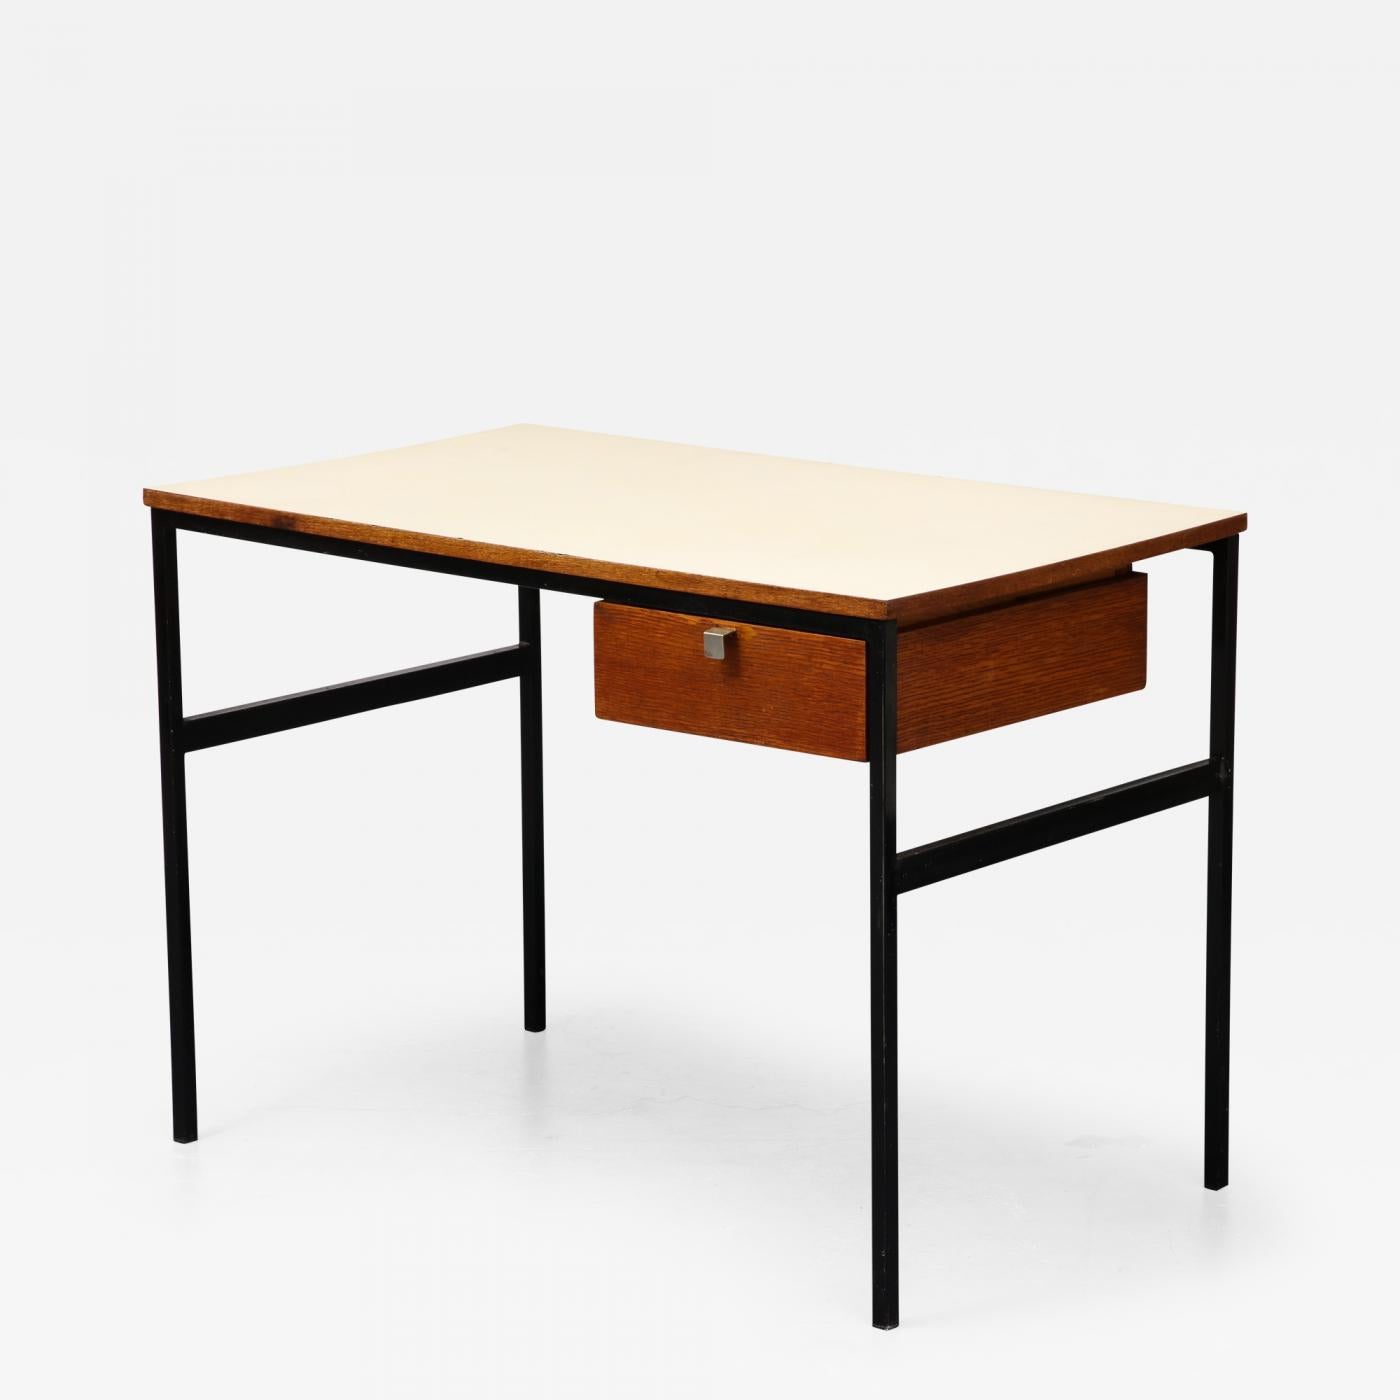 Oak, Steel, and Laminate Desk by Pierre Paulin, France

Smart desk with clean lines and beautiful patina.

